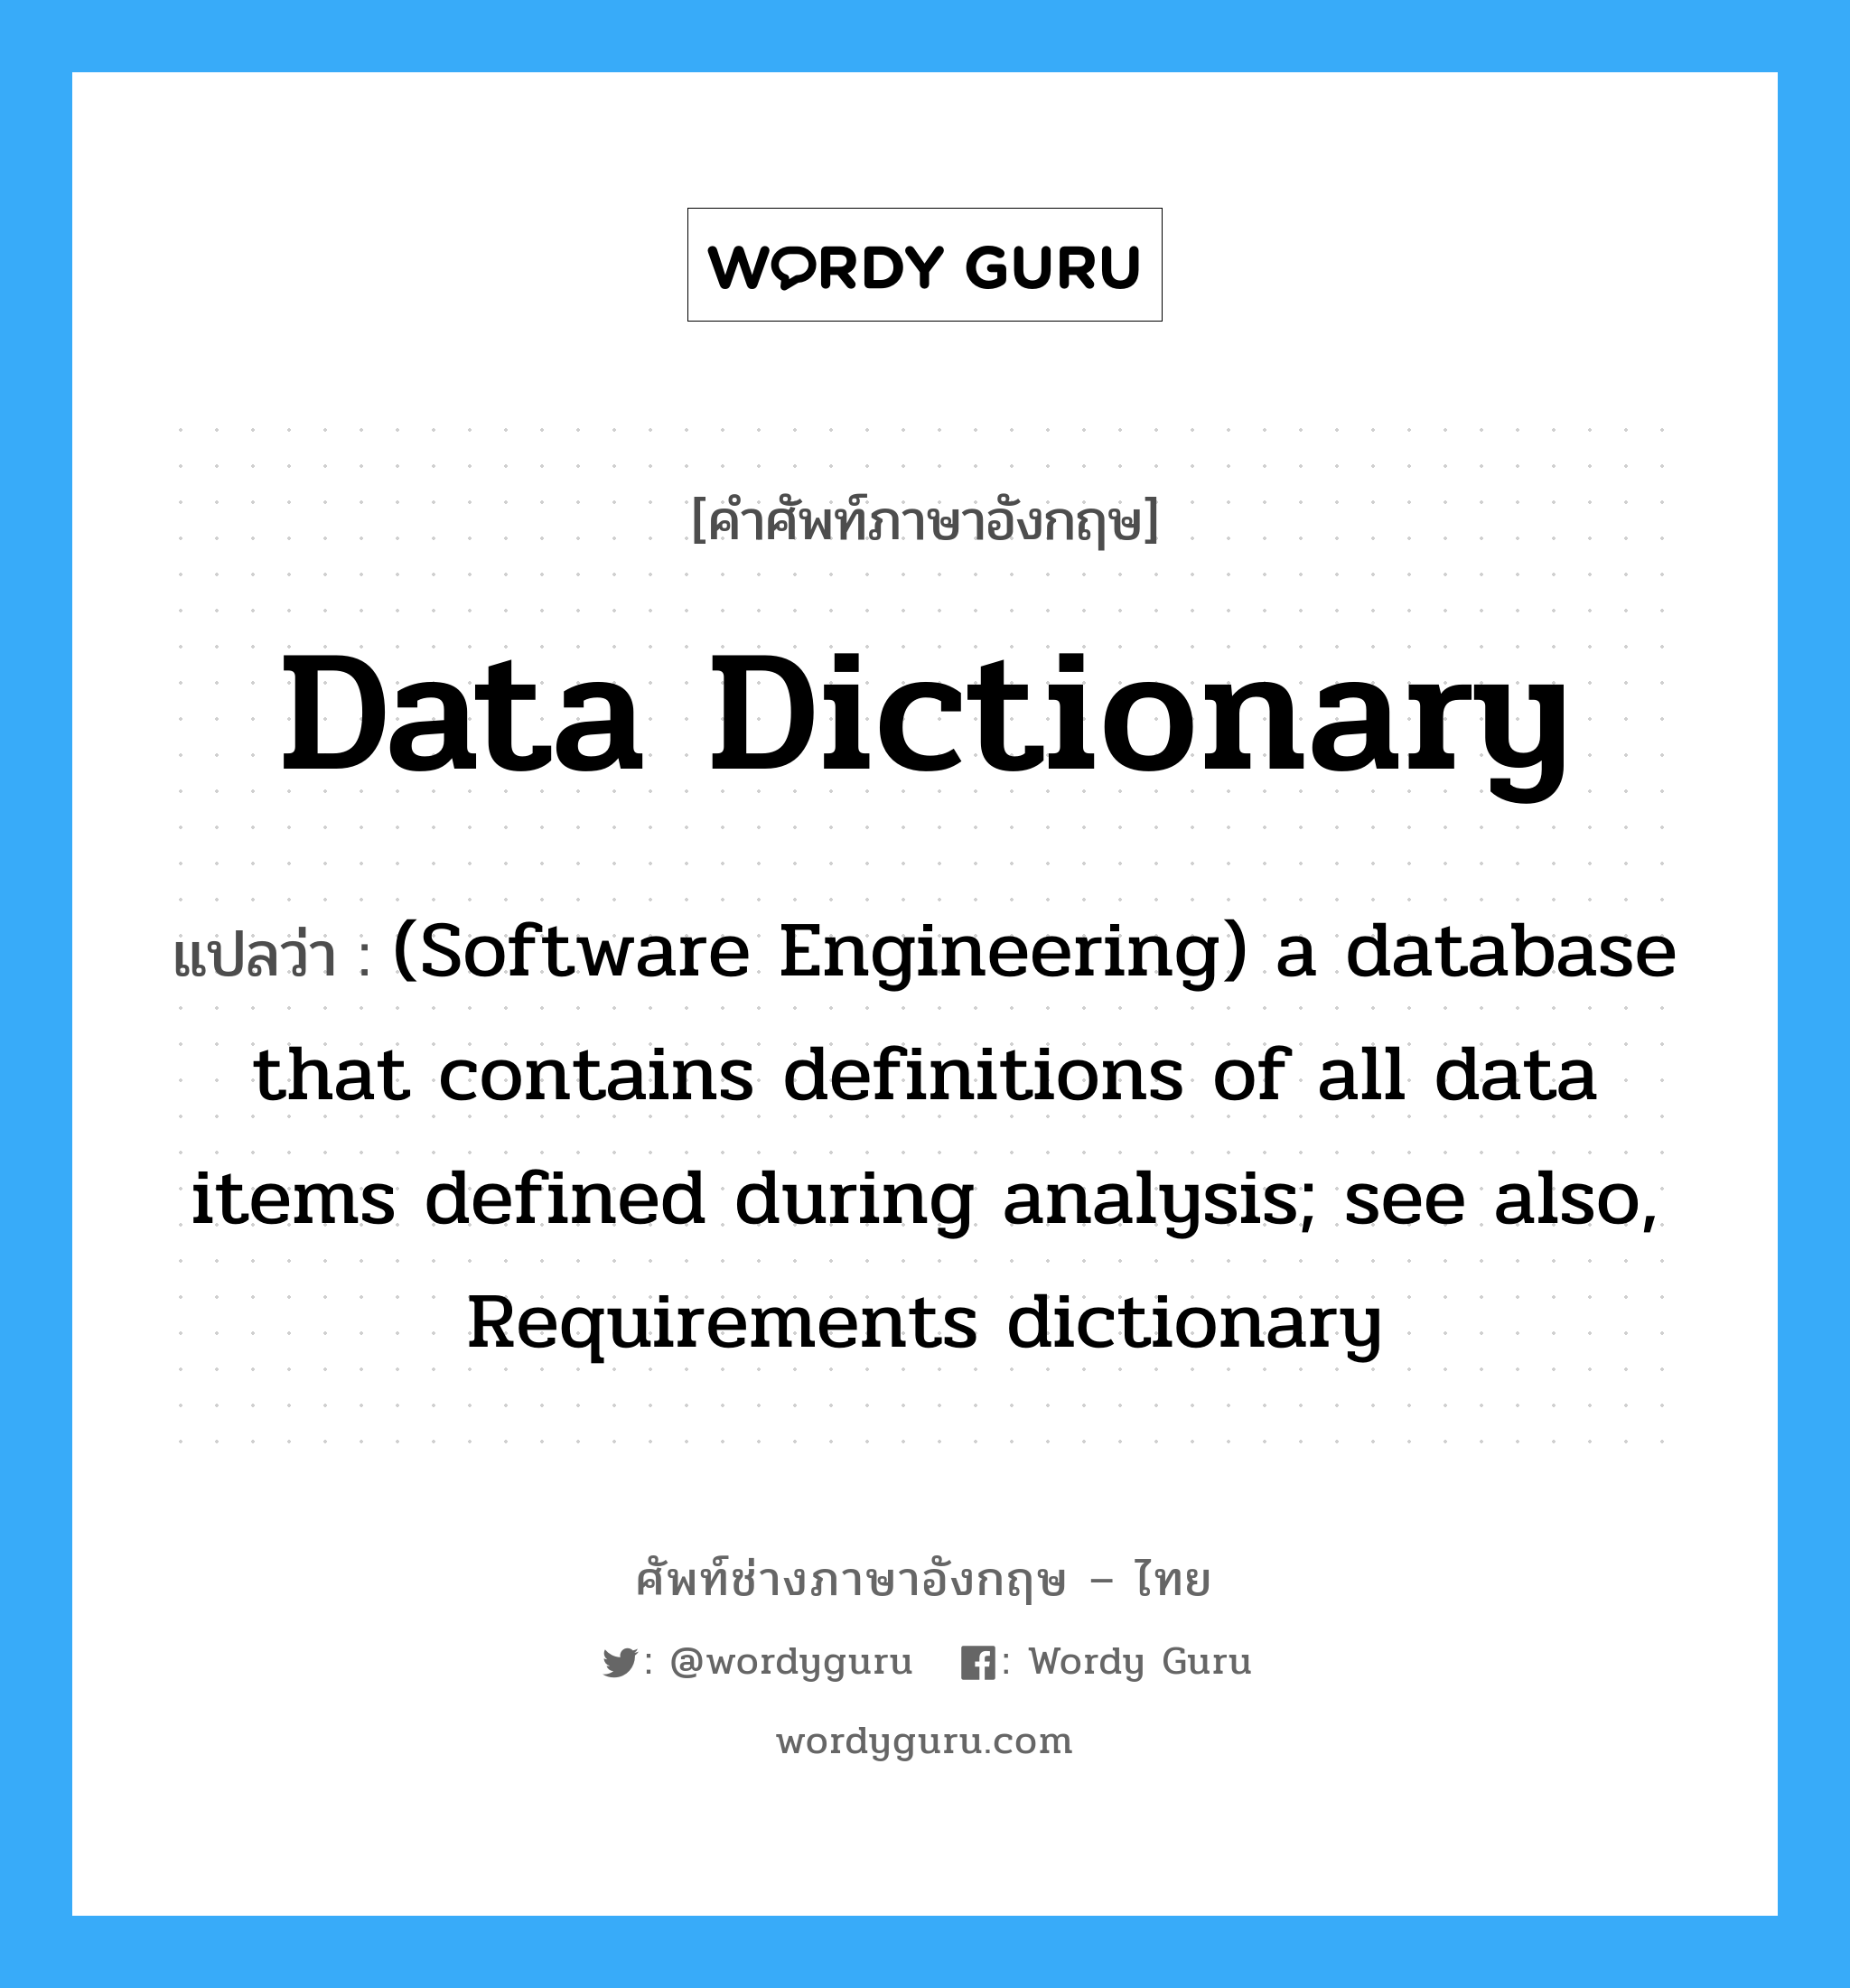 Data dictionary แปลว่า?, คำศัพท์ช่างภาษาอังกฤษ - ไทย Data dictionary คำศัพท์ภาษาอังกฤษ Data dictionary แปลว่า (Software Engineering) a database that contains definitions of all data items defined during analysis; see also, Requirements dictionary